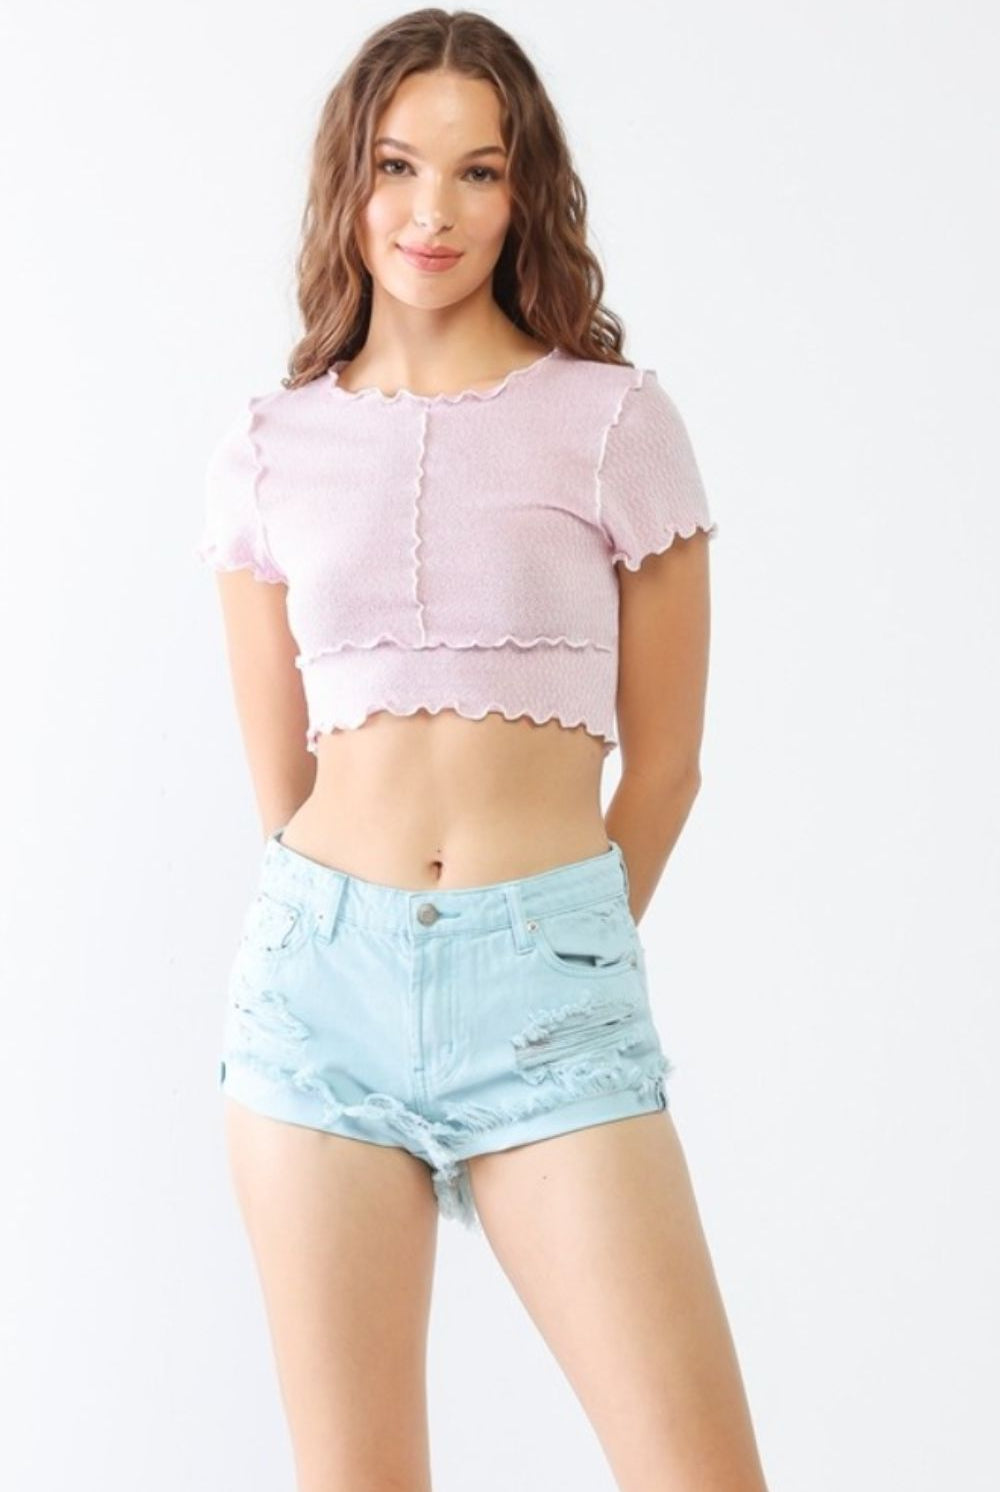 A model showcasing aqua ripped jean shorts with a distressed finish, paired with a soft pink cropped top for a summery, casual outfit.